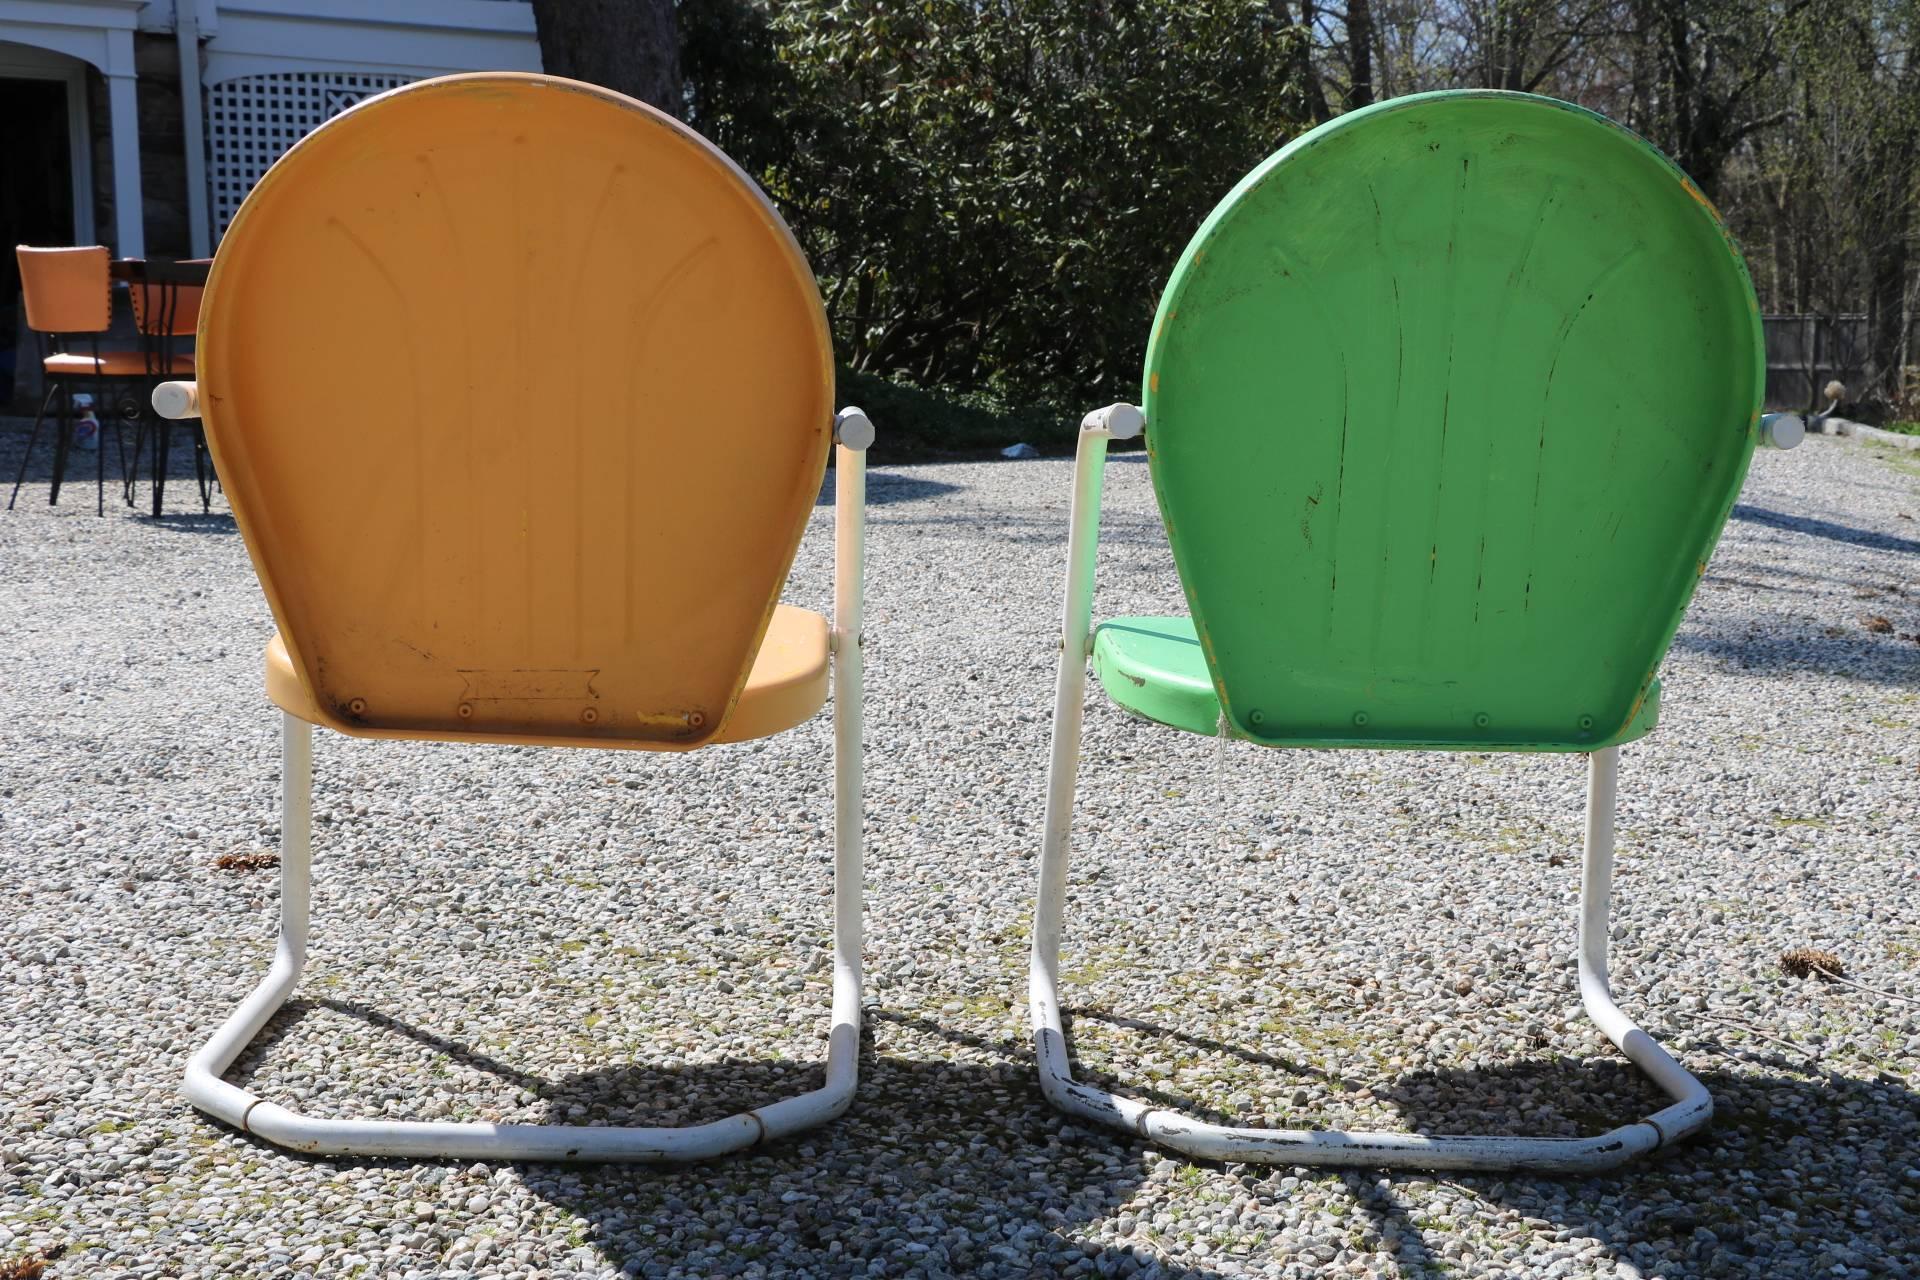 Summertime! Tangerine and Lime Green Retro Rockers Vintage 1950s Outdoor Chairs 1